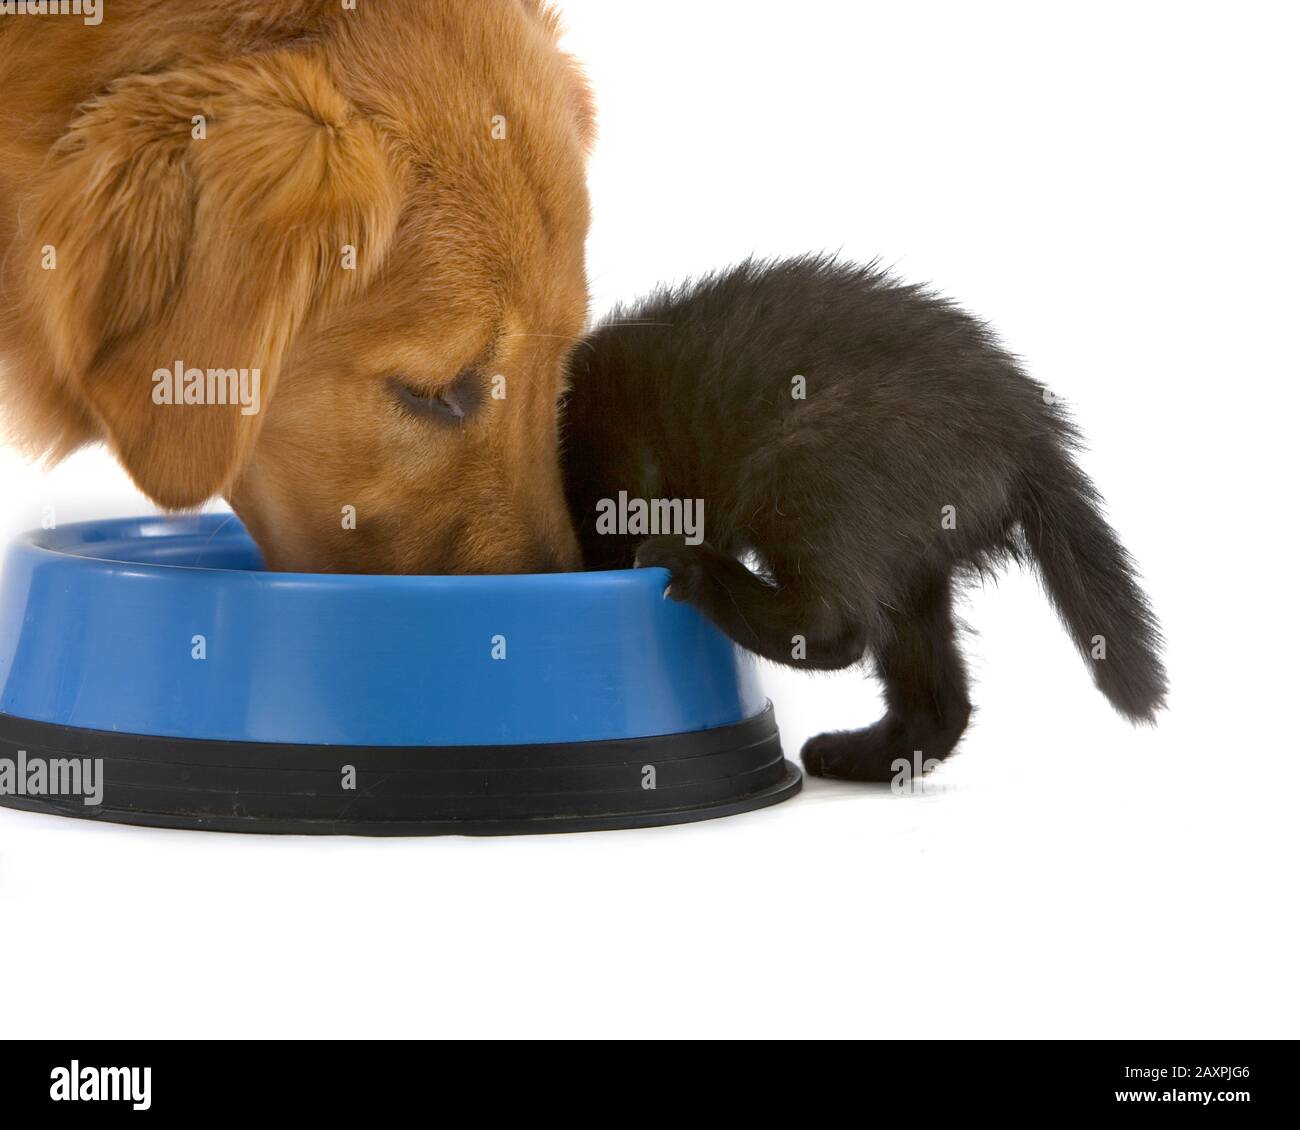 Kitten and Golden Retriever dog share a bowl of food on a white background Stock Photo